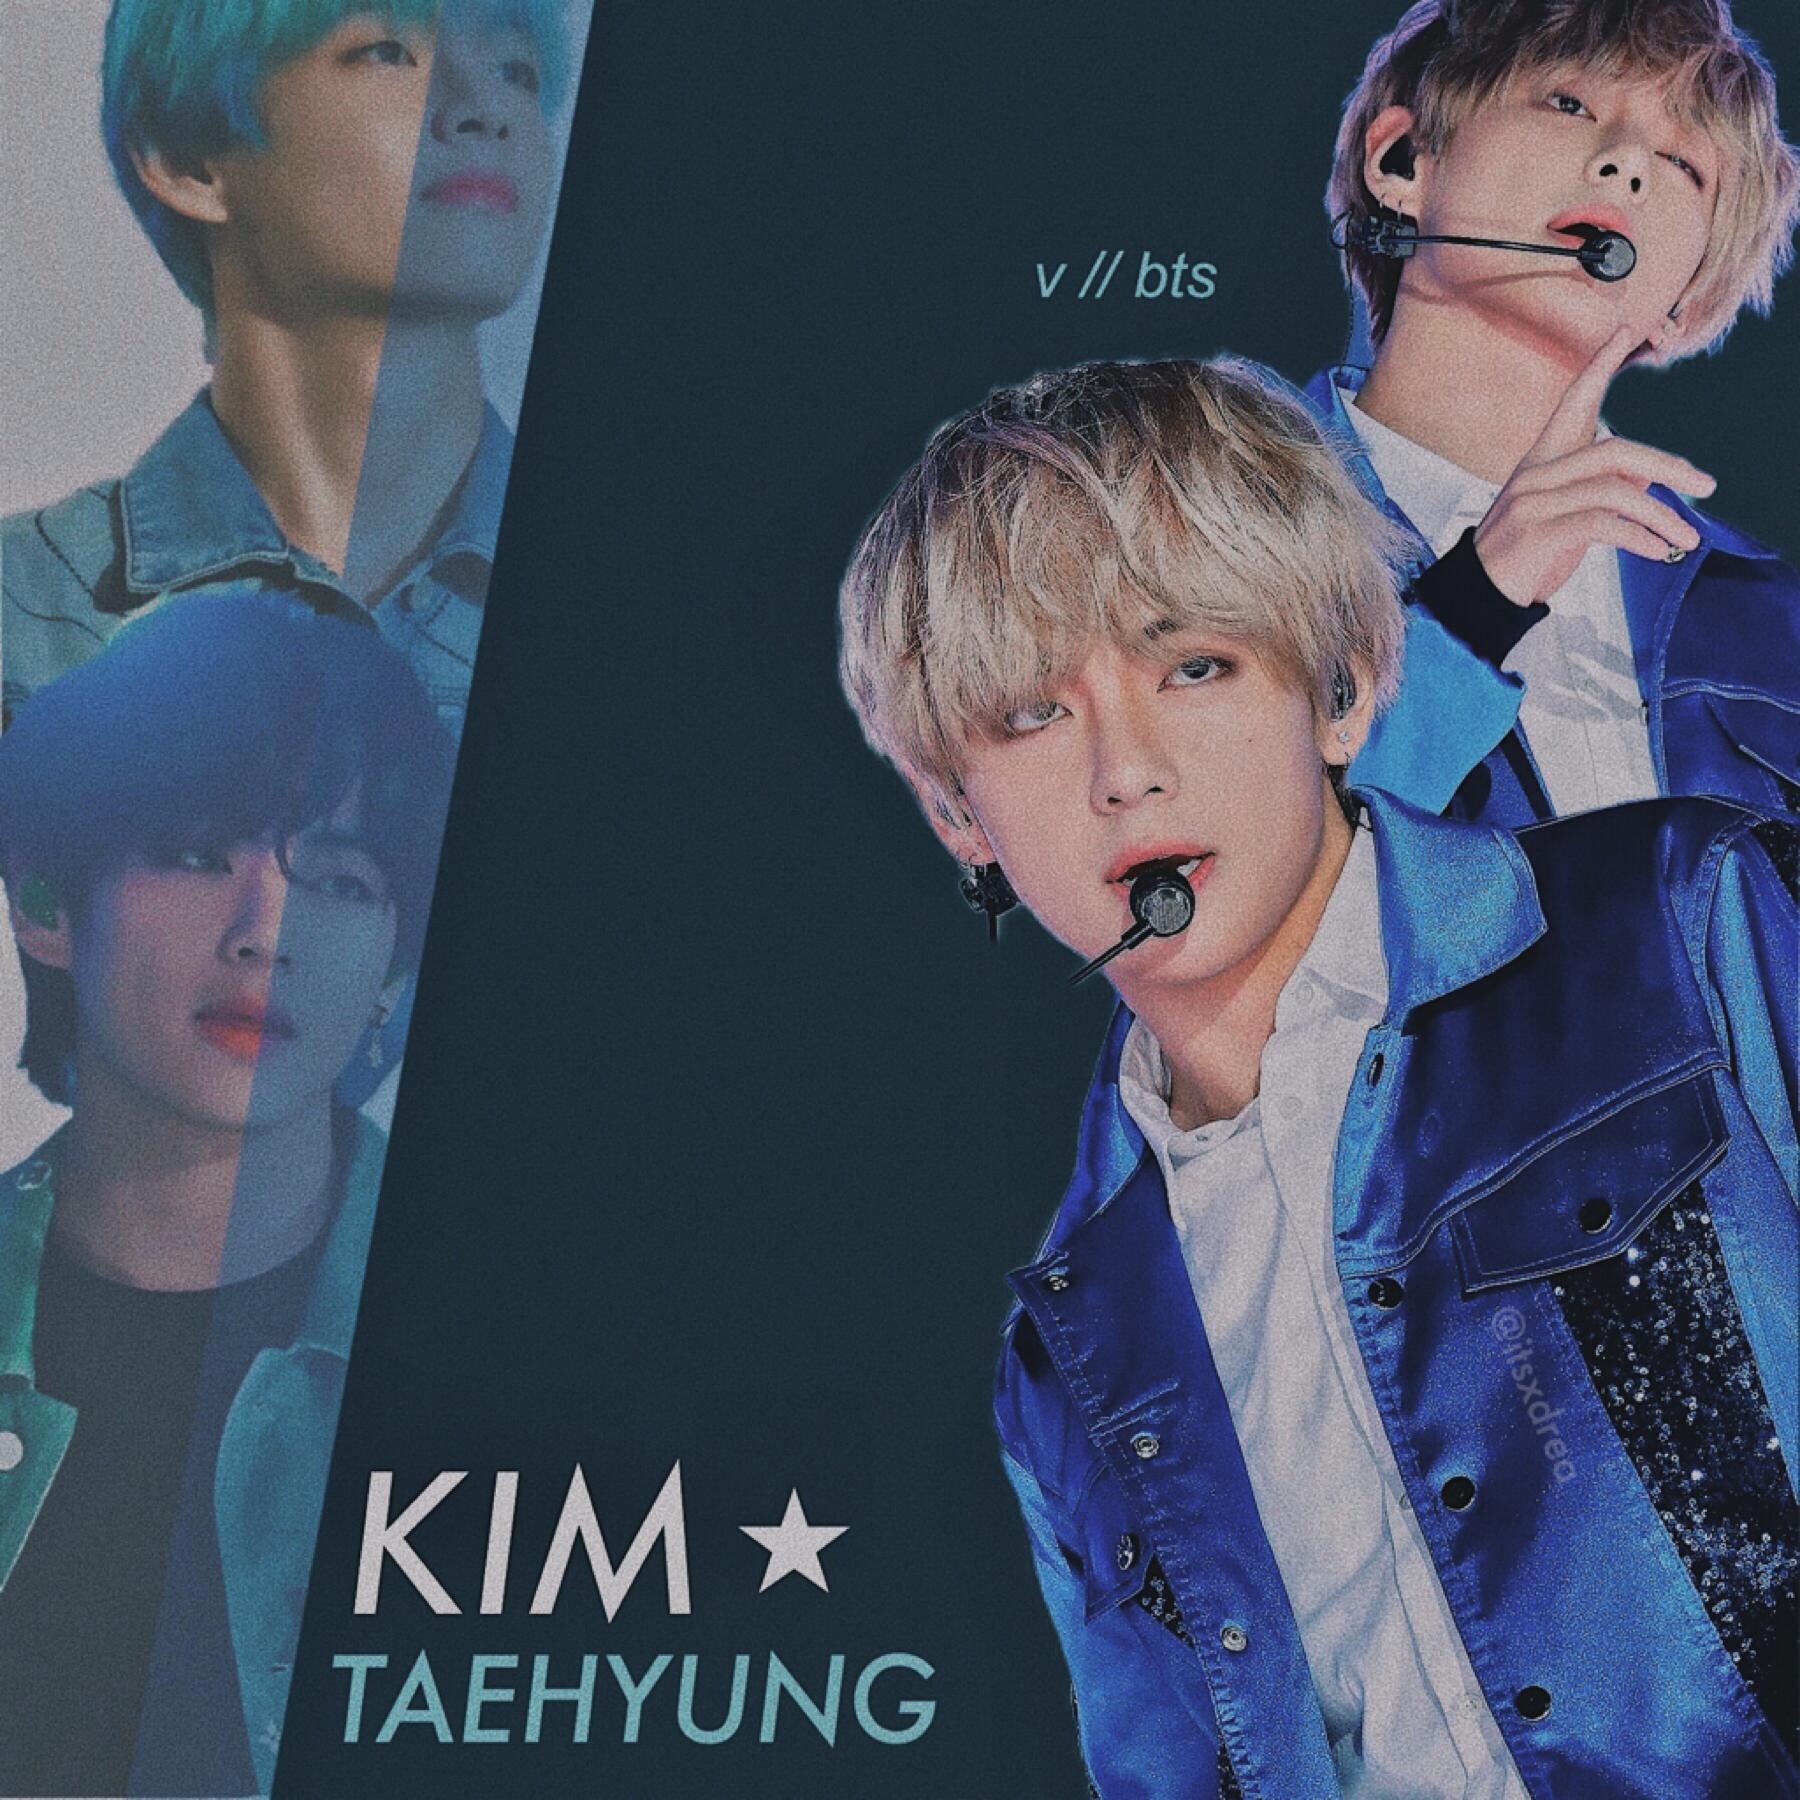 🌌
• kim taehyung // bts •
> edit request for @bubbletae- <
i hope you like !! i remixed my monthly playlist if anyone wants to bop to the same songs i’m listening to atm lmaoo